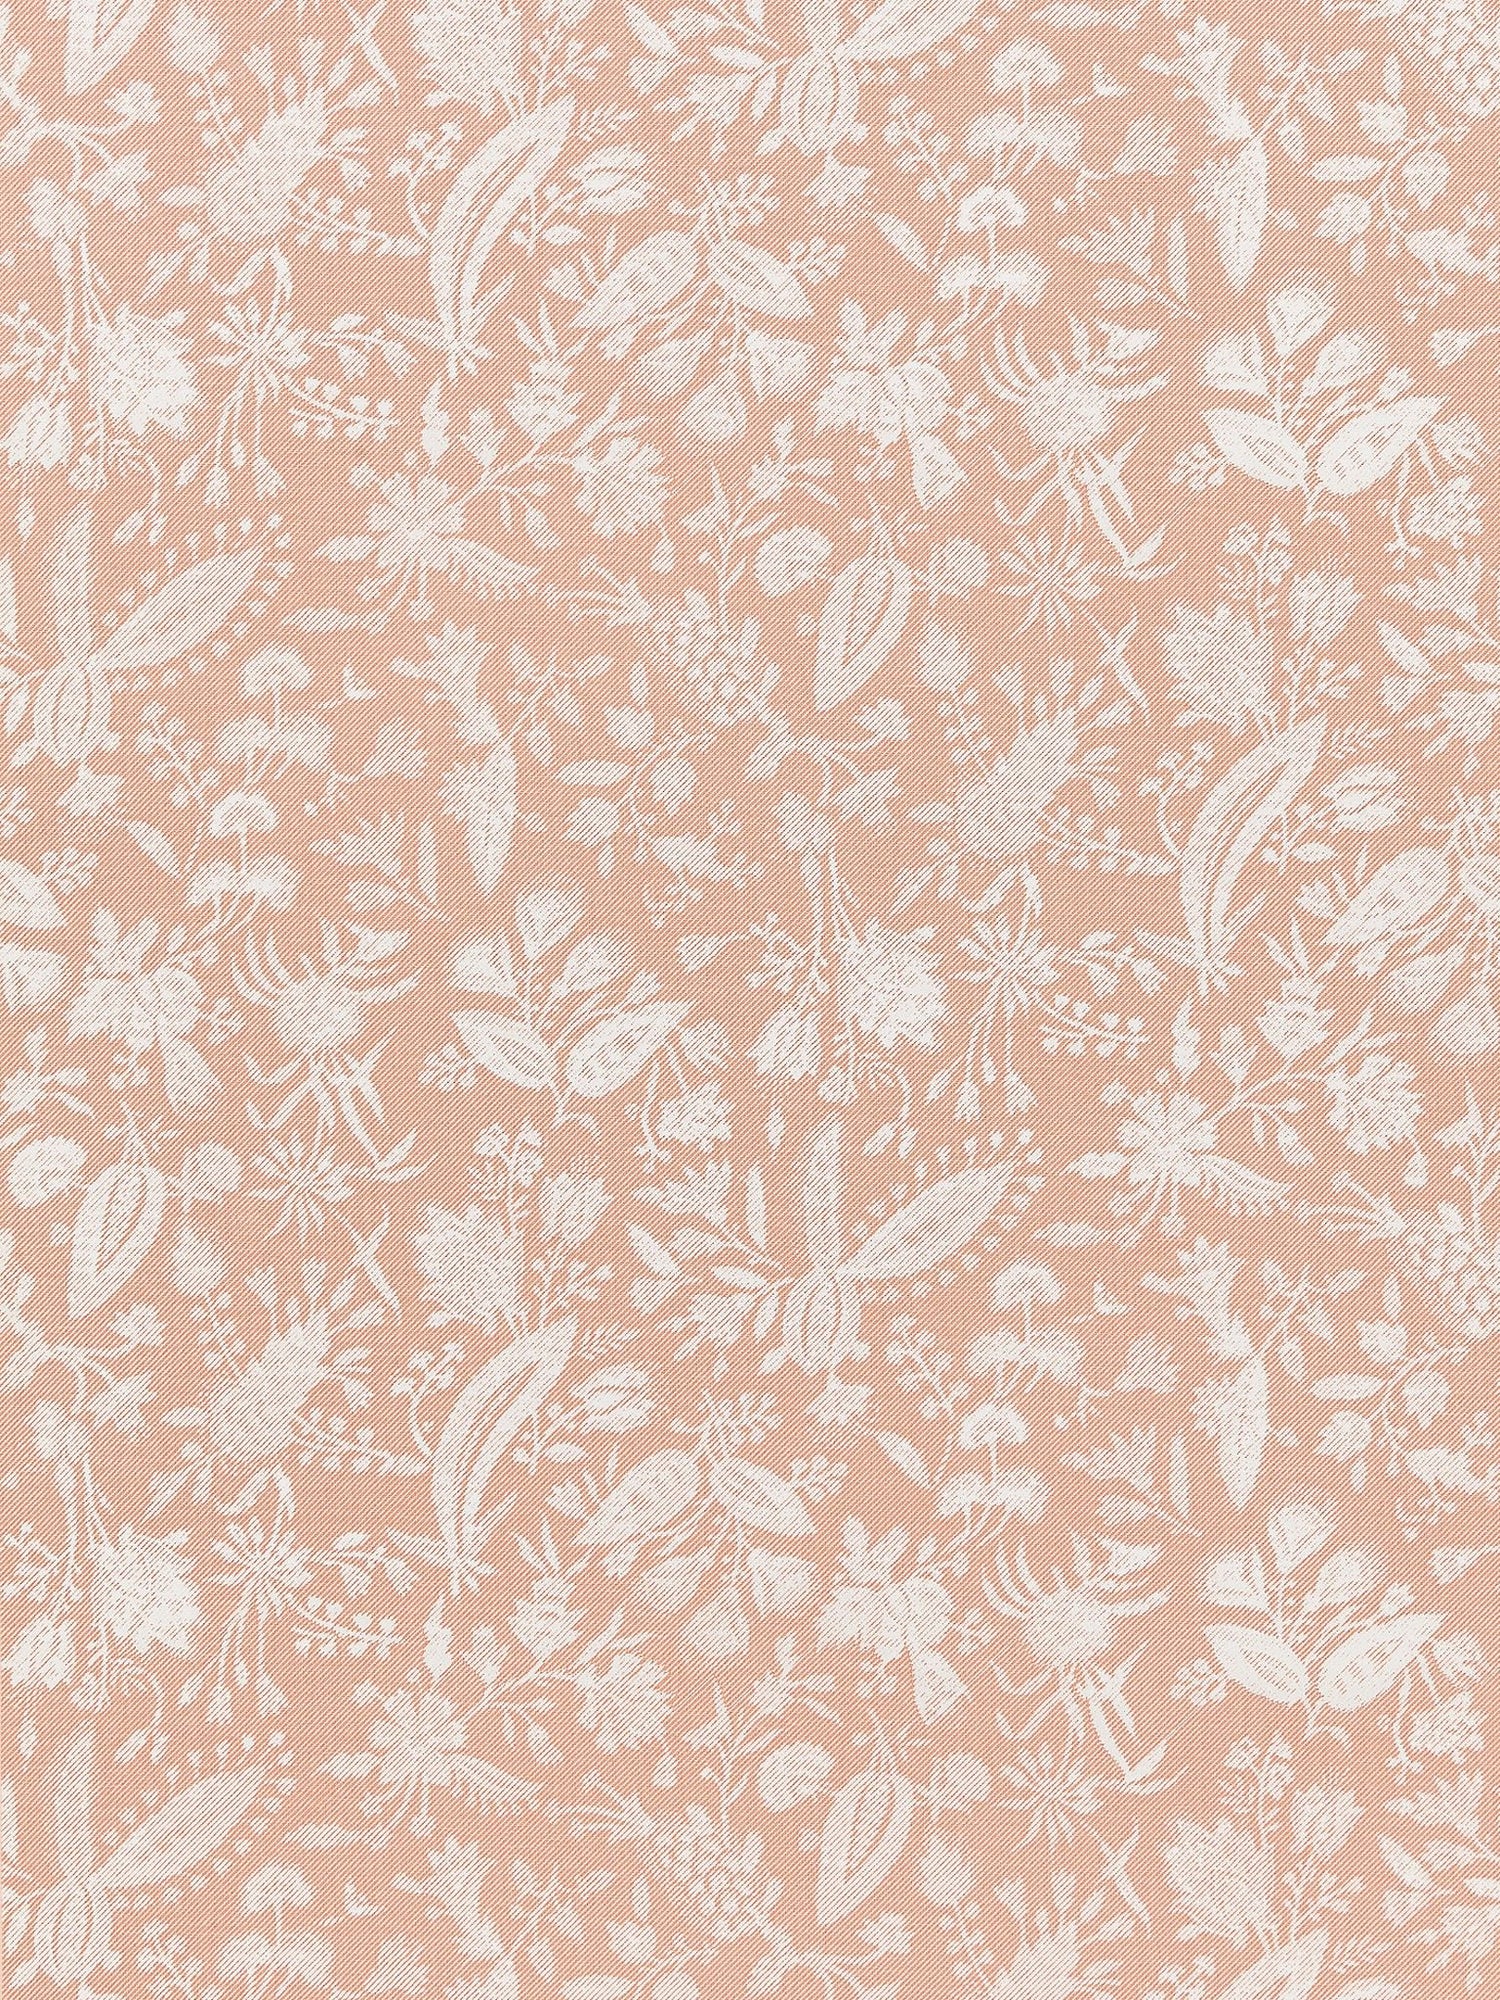 Tulia Linen Print fabric in blush color - pattern number SC 000116605 - by Scalamandre in the Scalamandre Fabrics Book 1 collection